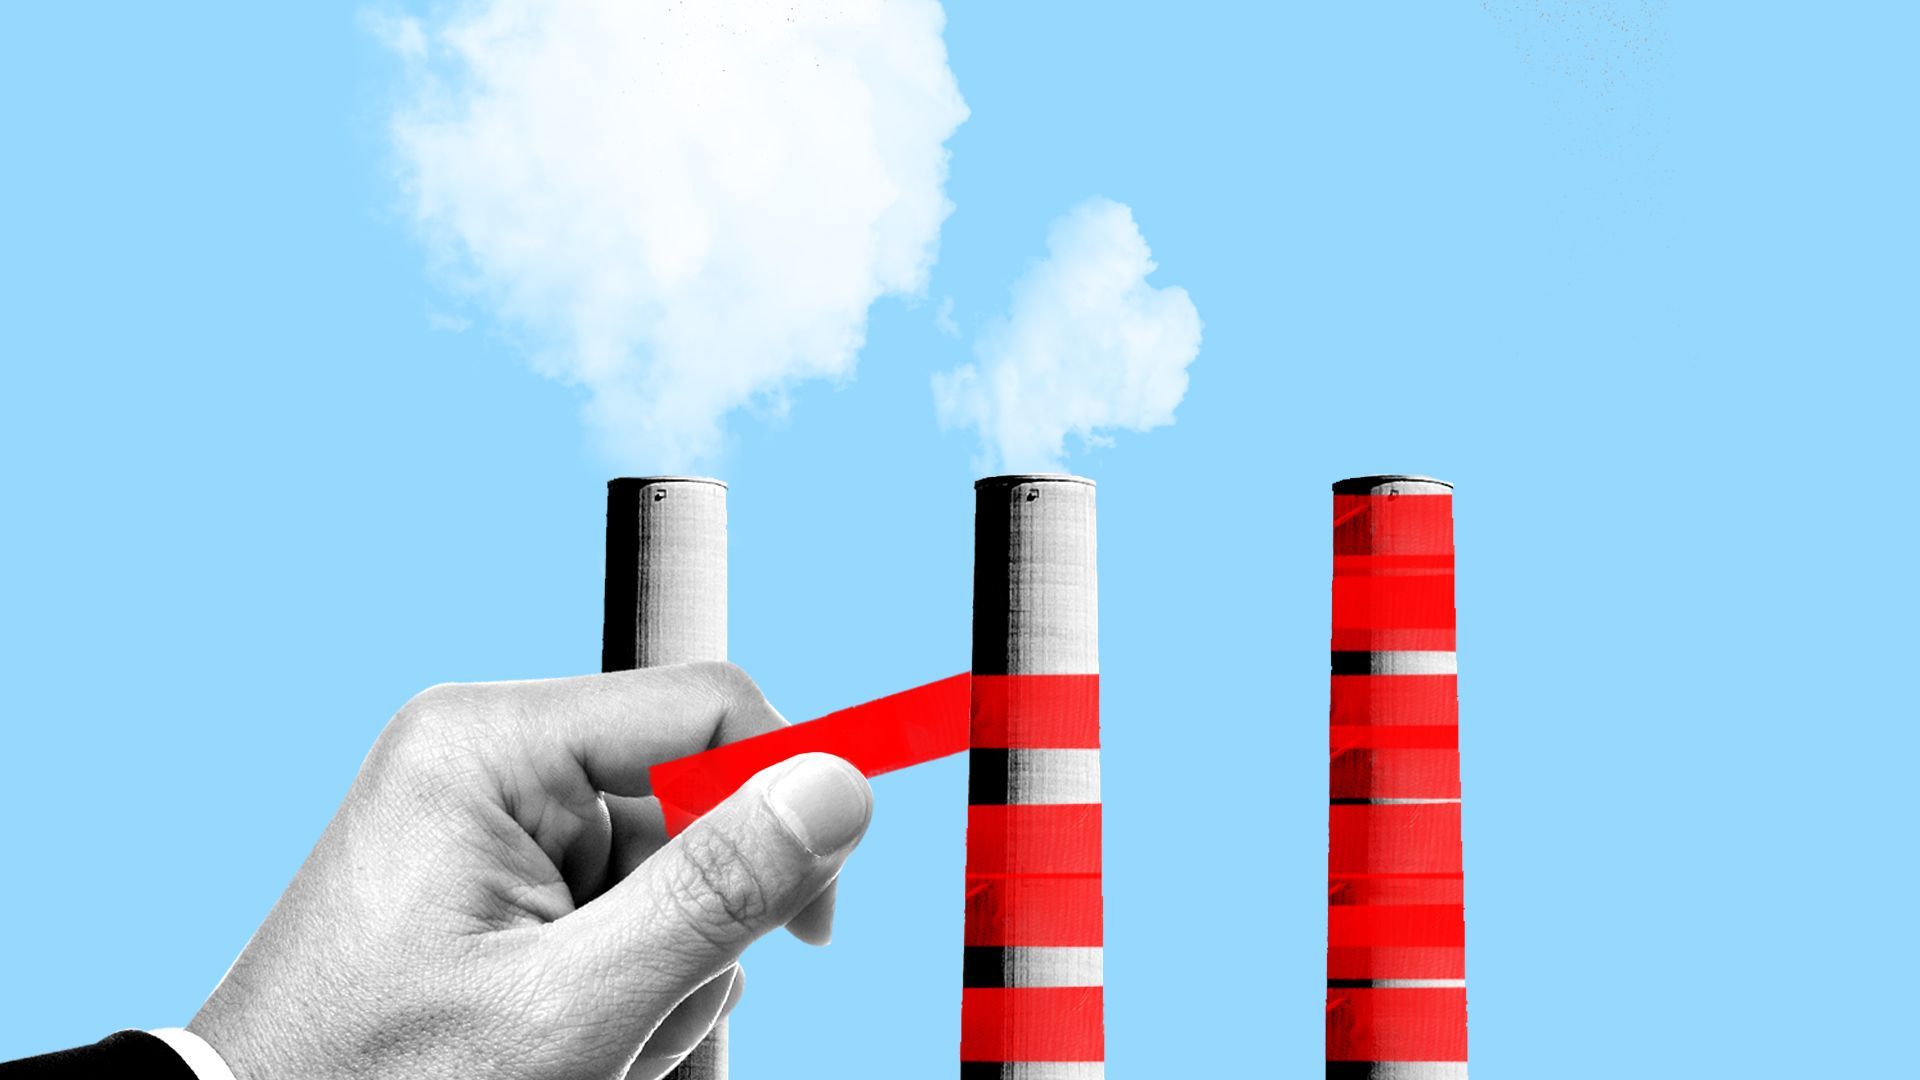 Illustration of a hand wrapping red tape around smoke stacks. 